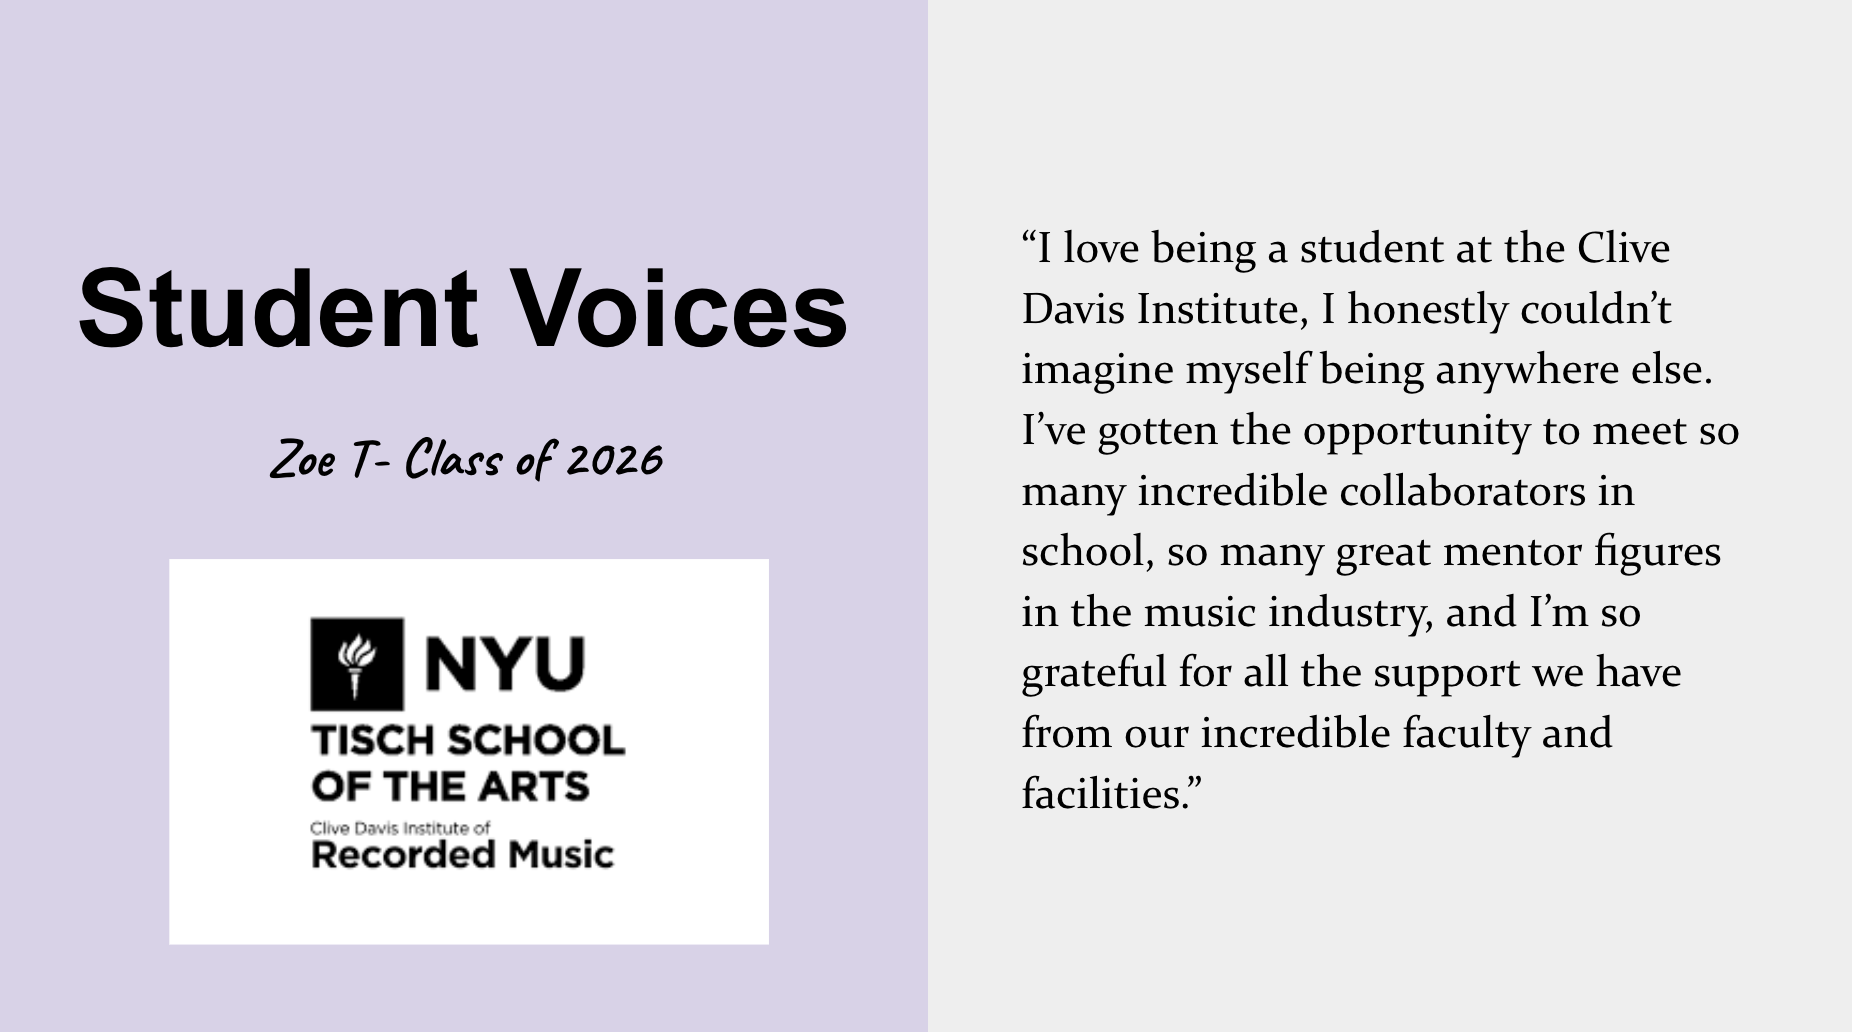 Student voice about the Tisch Recorded Music major. Zoe T., Class of 2026, says “I love being a student at the Clive Davis Institute, I honestly couldn’t imagine myself being anywhere else. I’ve gotten the opportunity to meet so many incredible collaborators in school, so many great mentor figures in the music industry, and I’m so grateful for all the support we have from our incredible faculty and facilities.”